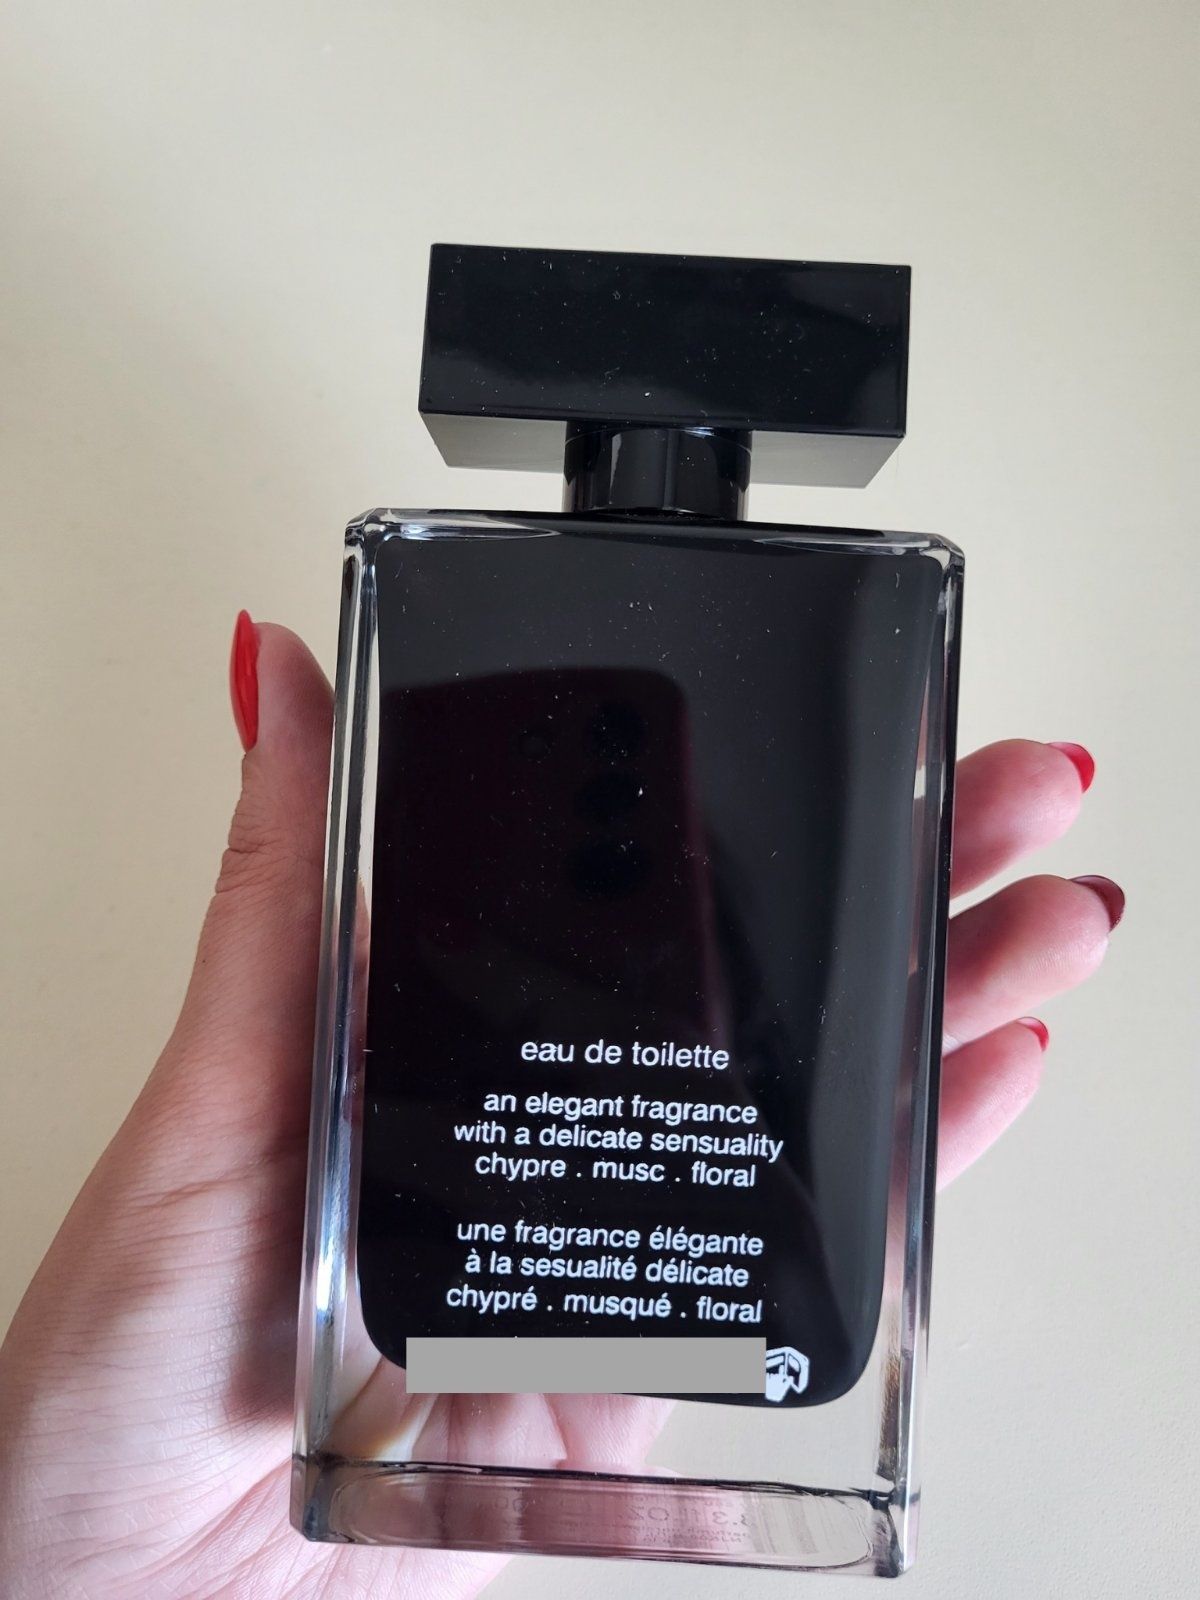 Narciso Rodriguez For Her (Туалетная вода) 100 мл